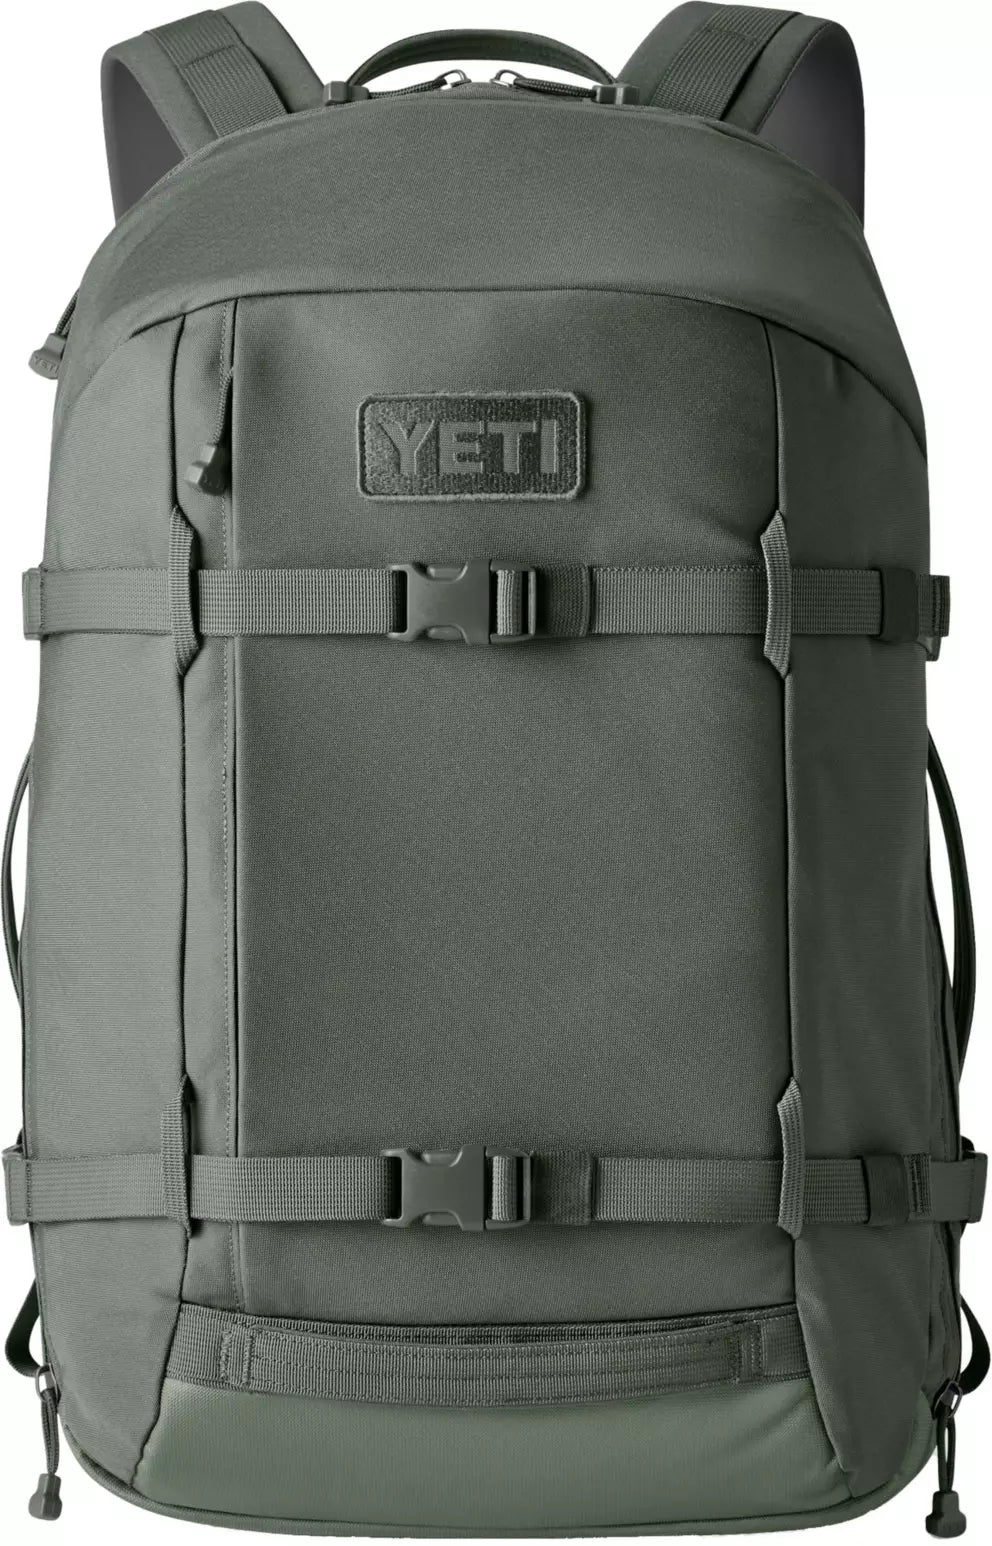 What's in my Yeti Crossroads Backpack 